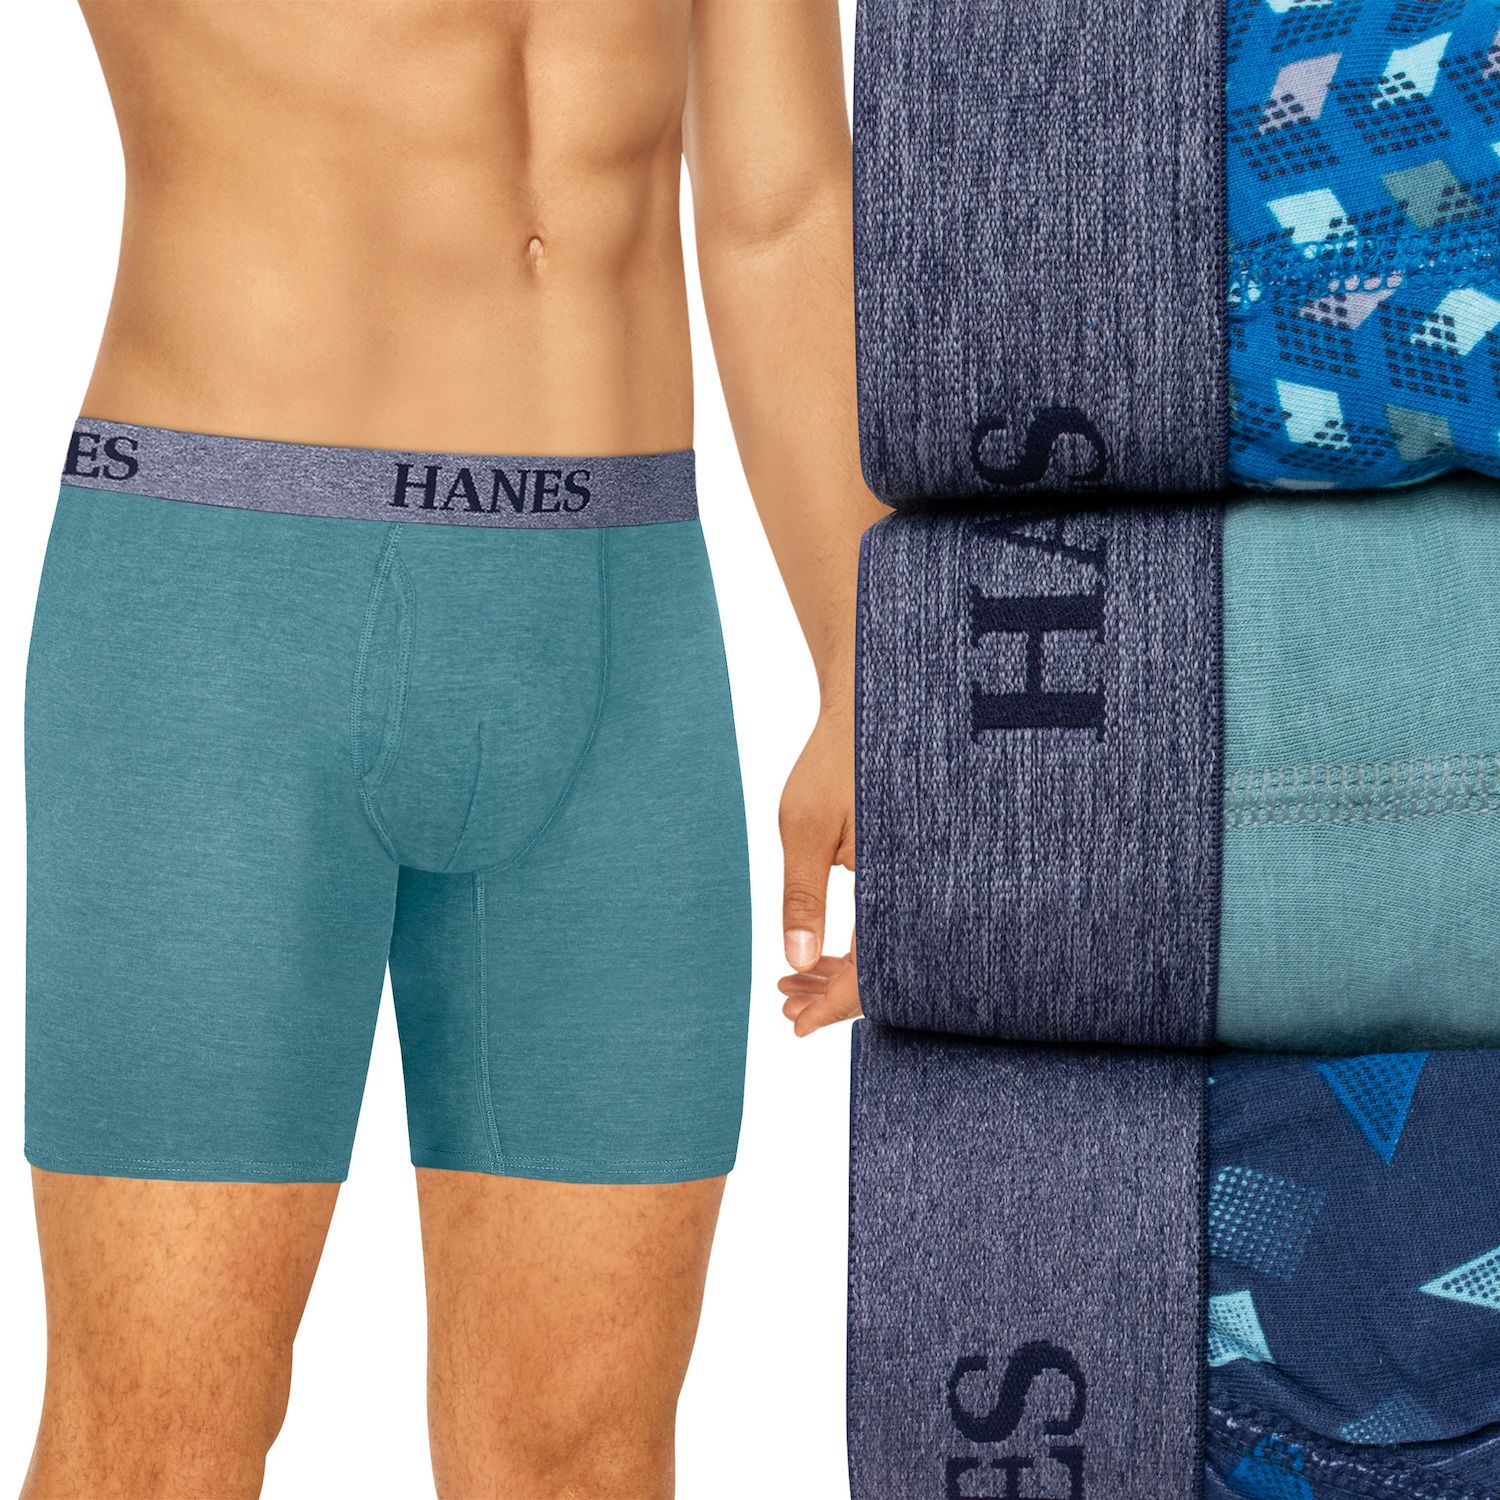 Image for Hanes Men's Big & Tall Ultimate 3-pack Tagless Stretch Boxer Briefs 2XL at Kohl's.